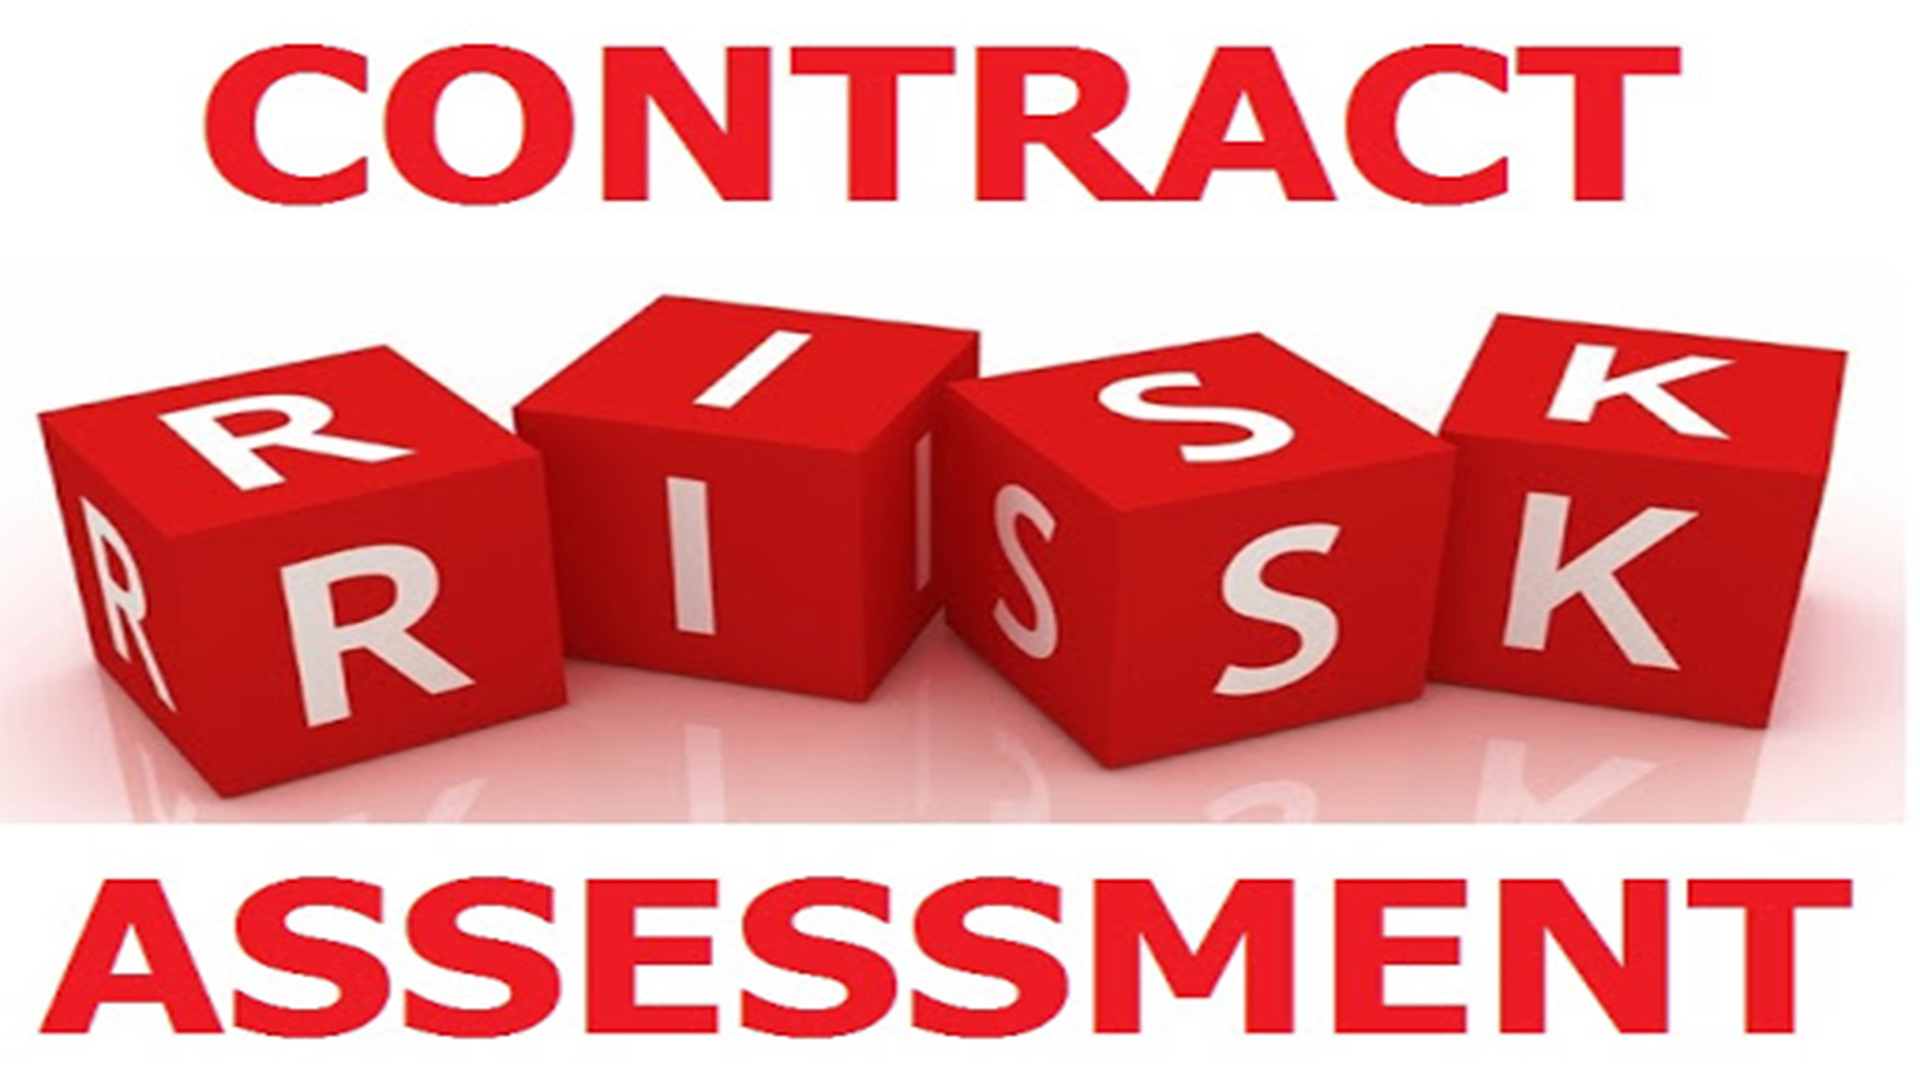 The Contractual Risk Management Wizard